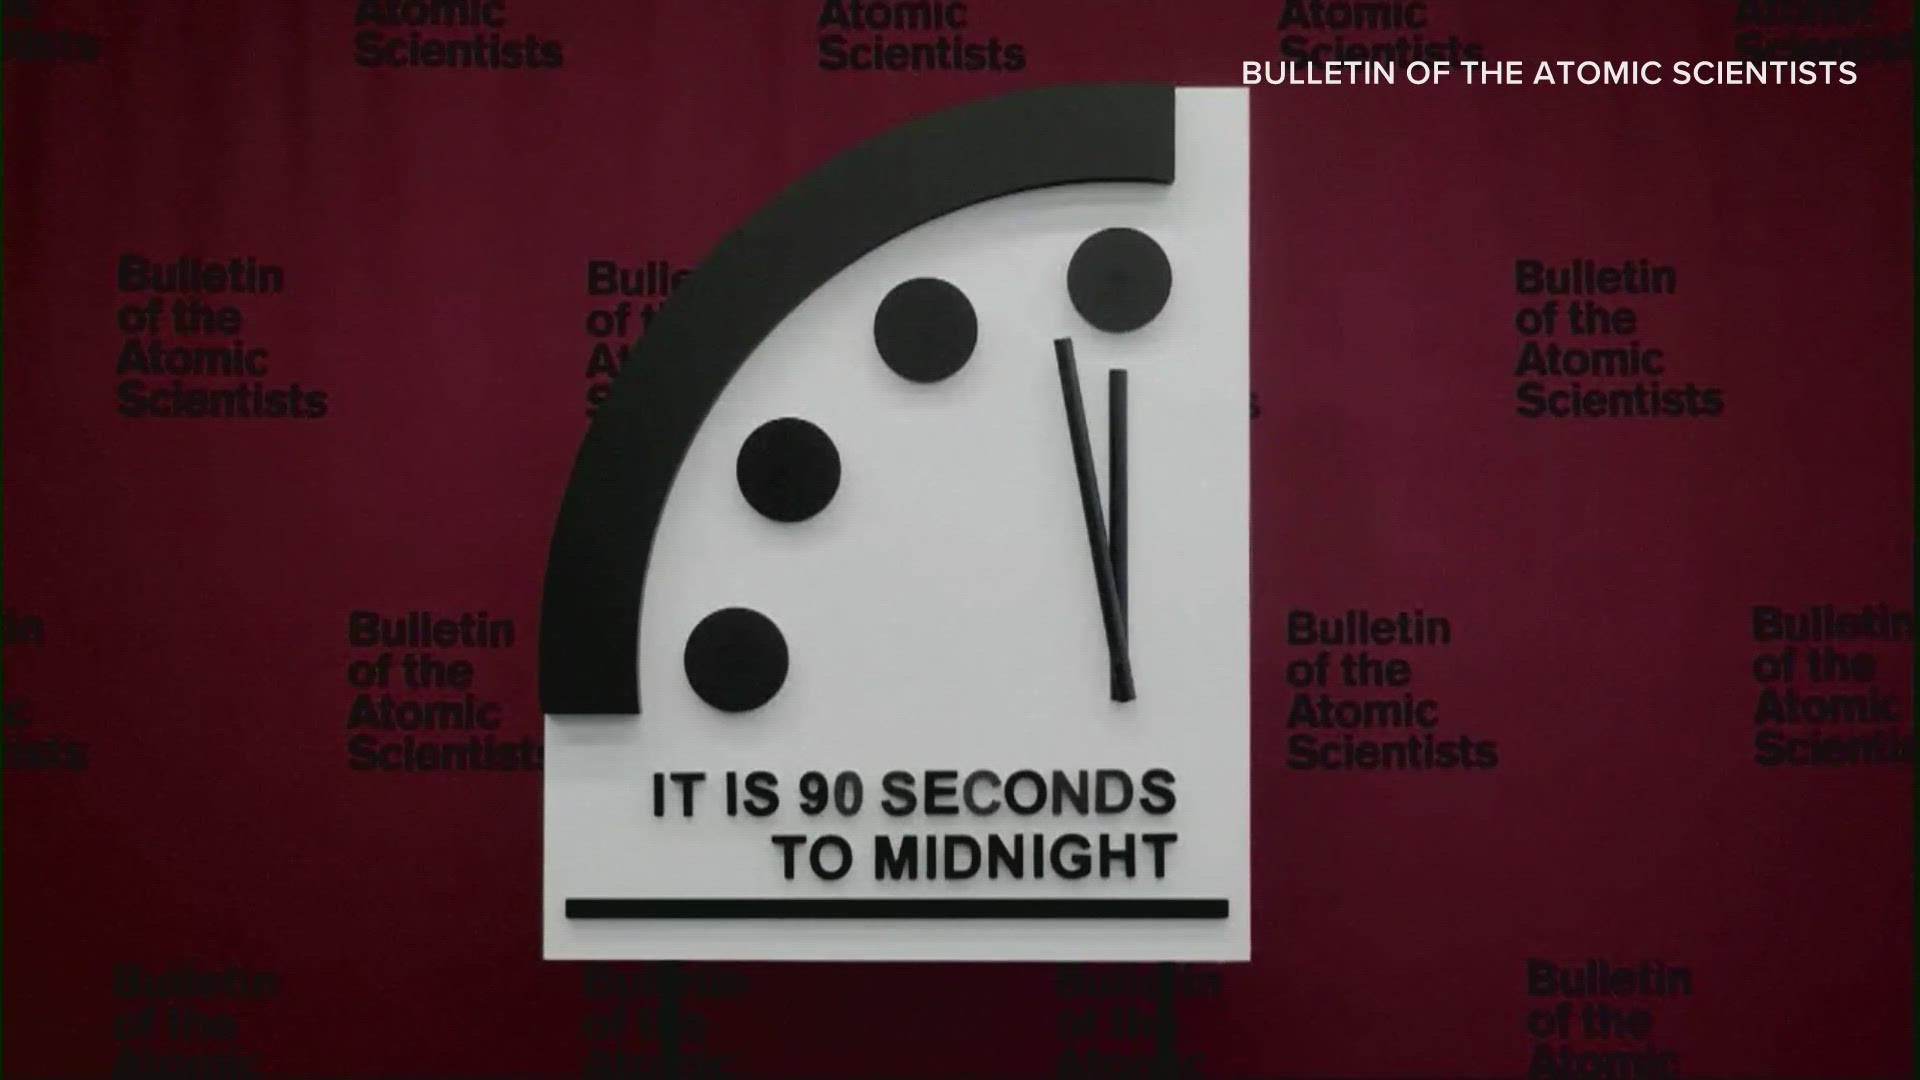 The Doomsday Clock, a symbolic countdown to human extinction established in 1947, remains at 90 seconds to midnight for the second year in a row.